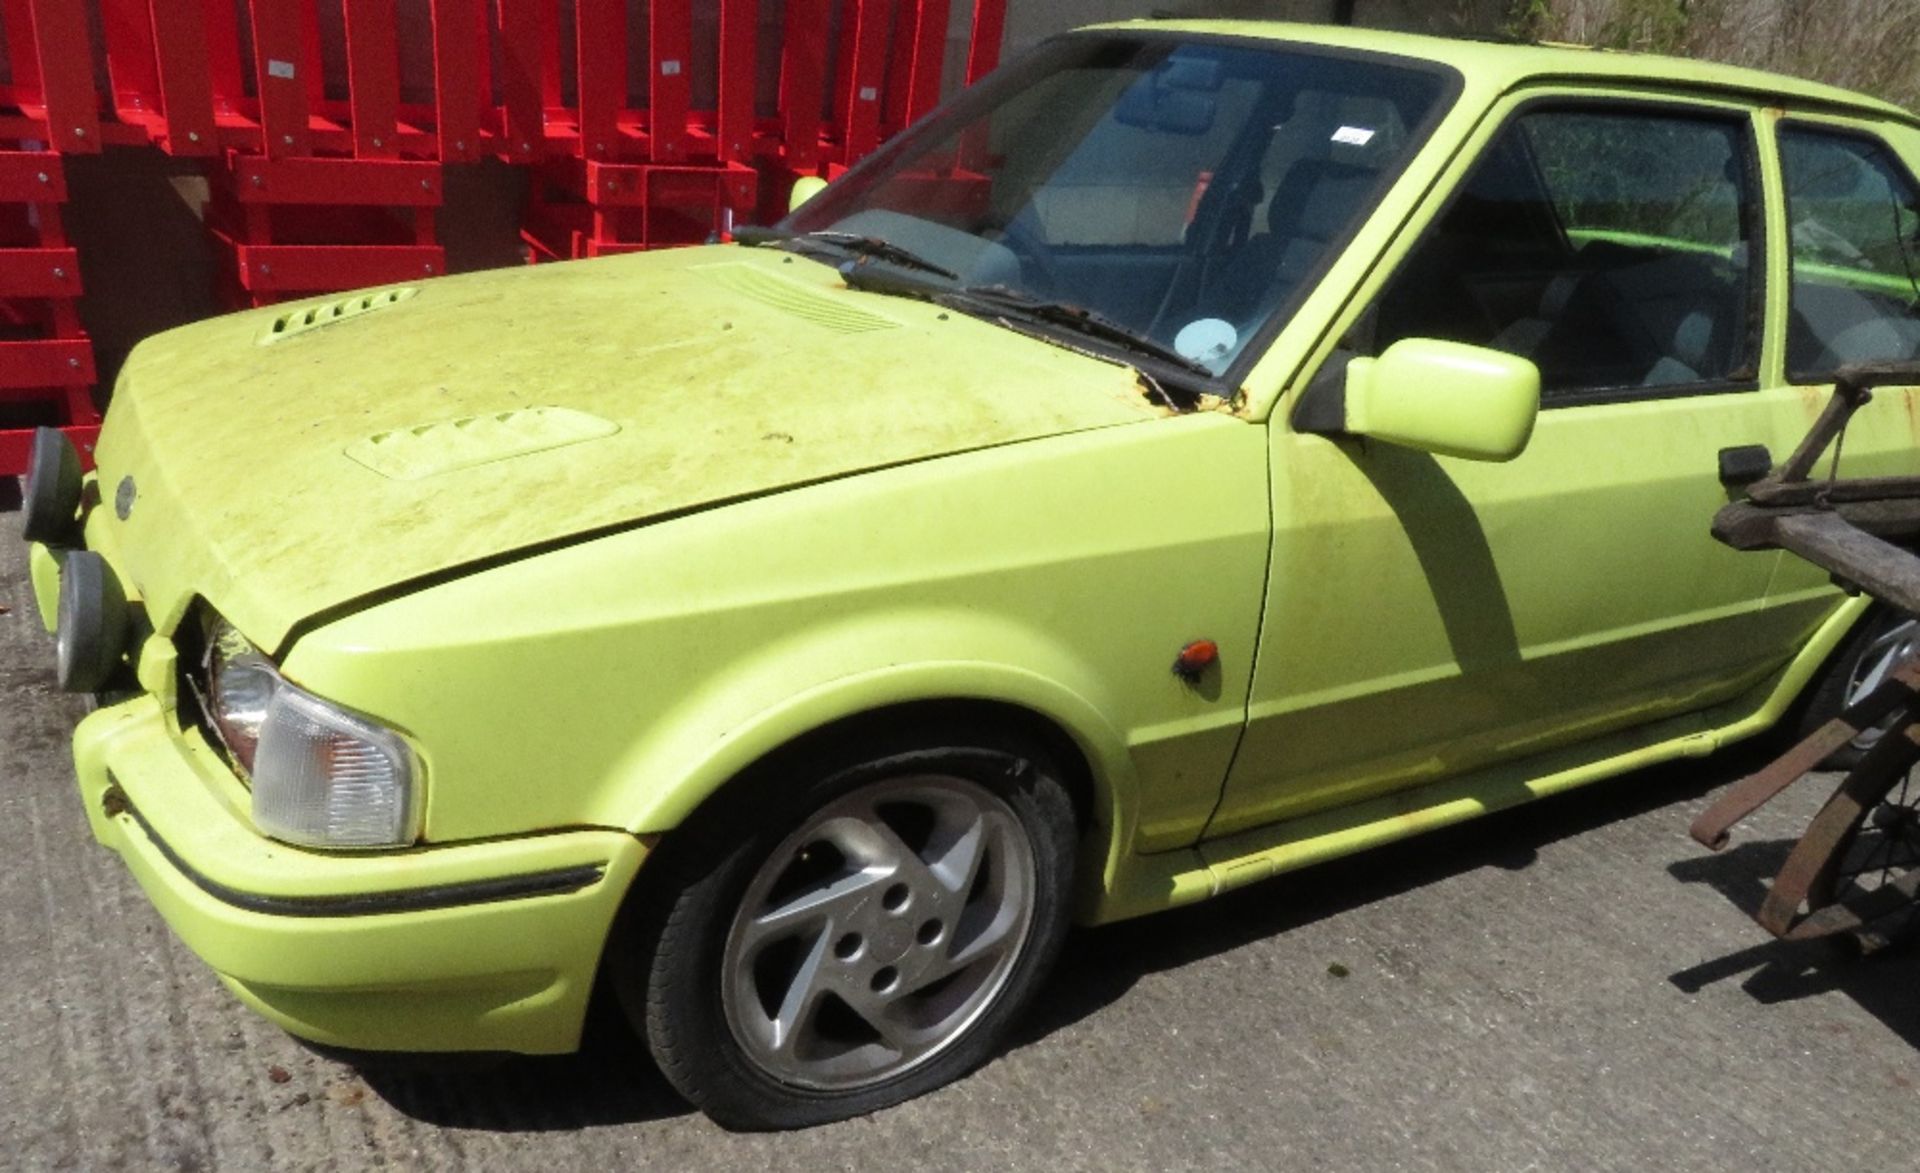 Ford RS Turbo, 2 door Reg no D378 RKM, we have keys & V5, the vehicle appears to be original with - Image 7 of 12